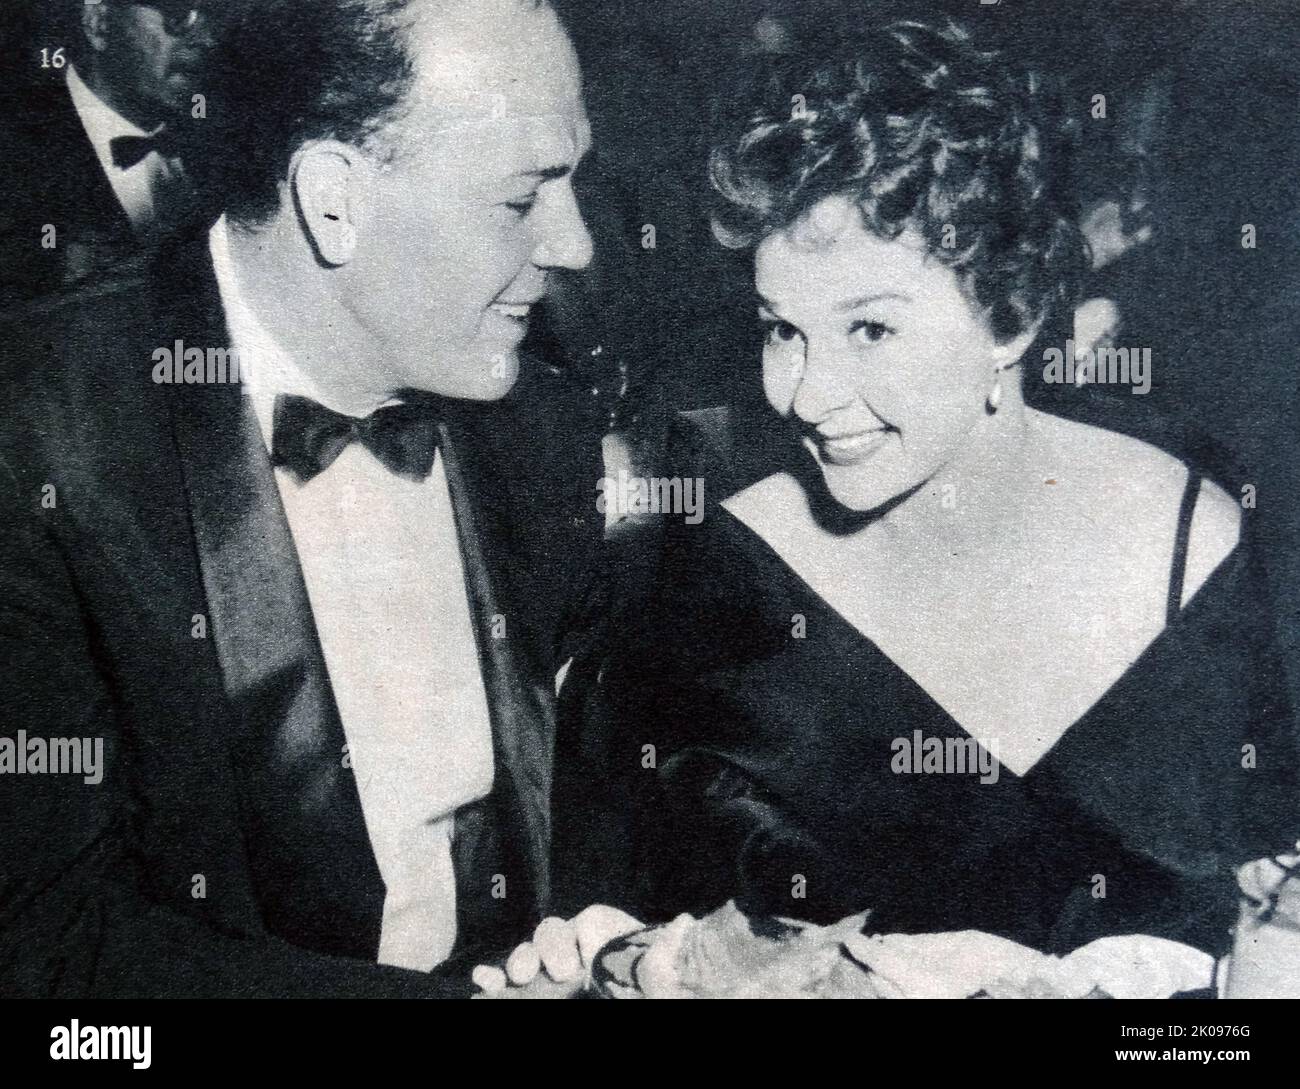 Actress Susan Hayward with her husband Eaton Chalkley. Susan Hayward (born Edythe Marrenner; June 30, 1917 - March 14, 1975) was an American actress and model. She was best known for her film portrayals of women that were based on true stories. Stock Photo